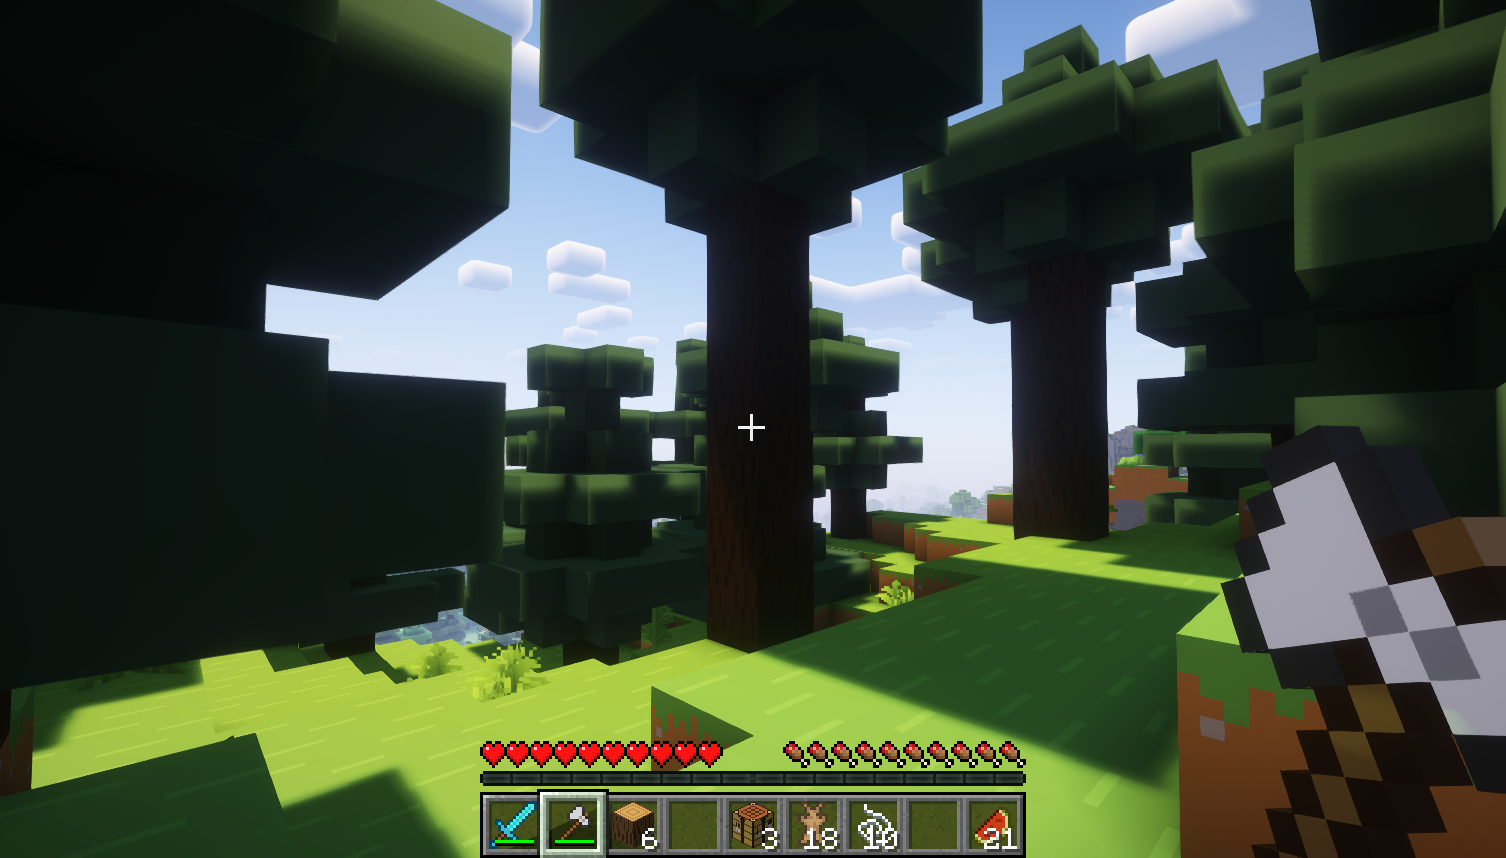 Minecraft screenshot showing a spruce tree in a spruce forest